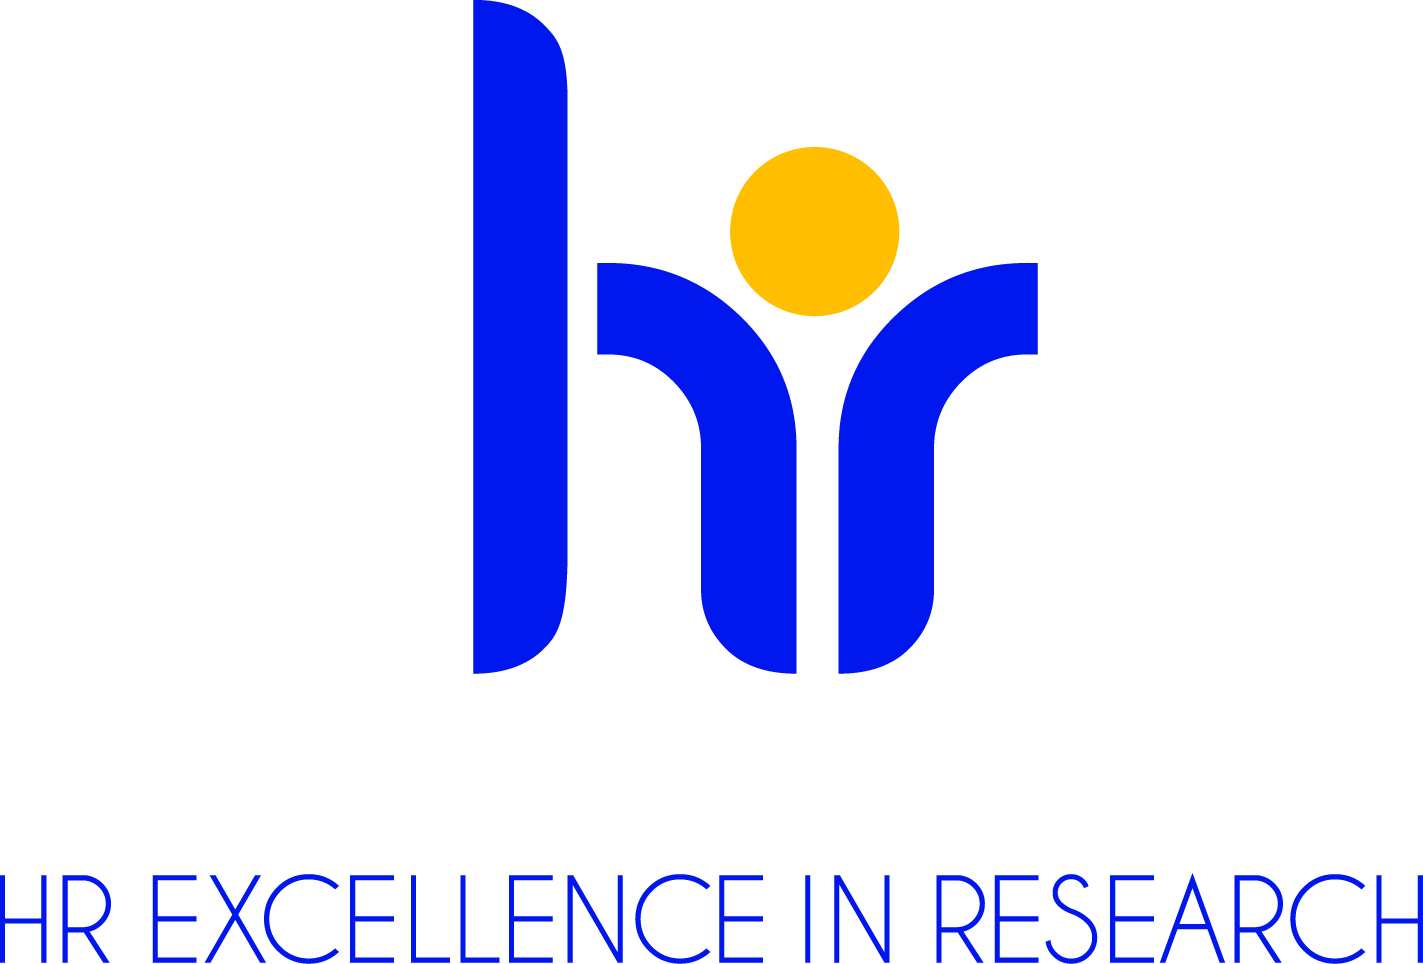 hr_excellence